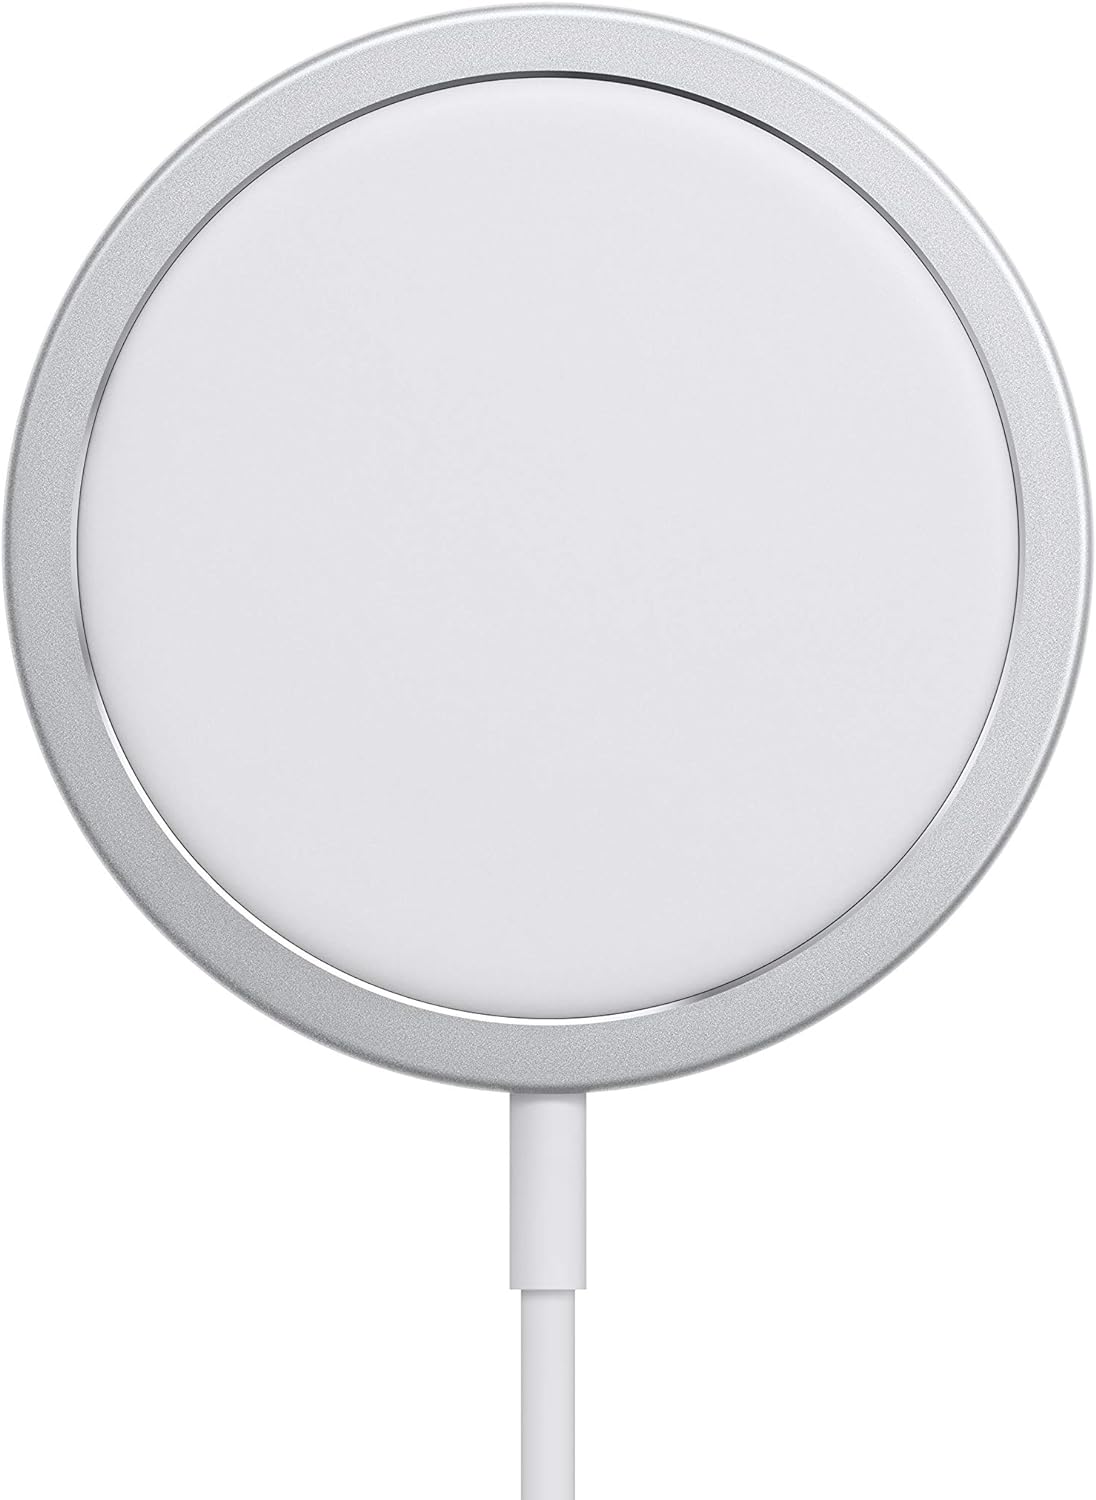 Apple MagSafe Charger – Wireless Charger with Fast Charging Capability, Type C Wall Charger, Compatible with iPhone and AirPods: Detailed Review & Recommendations